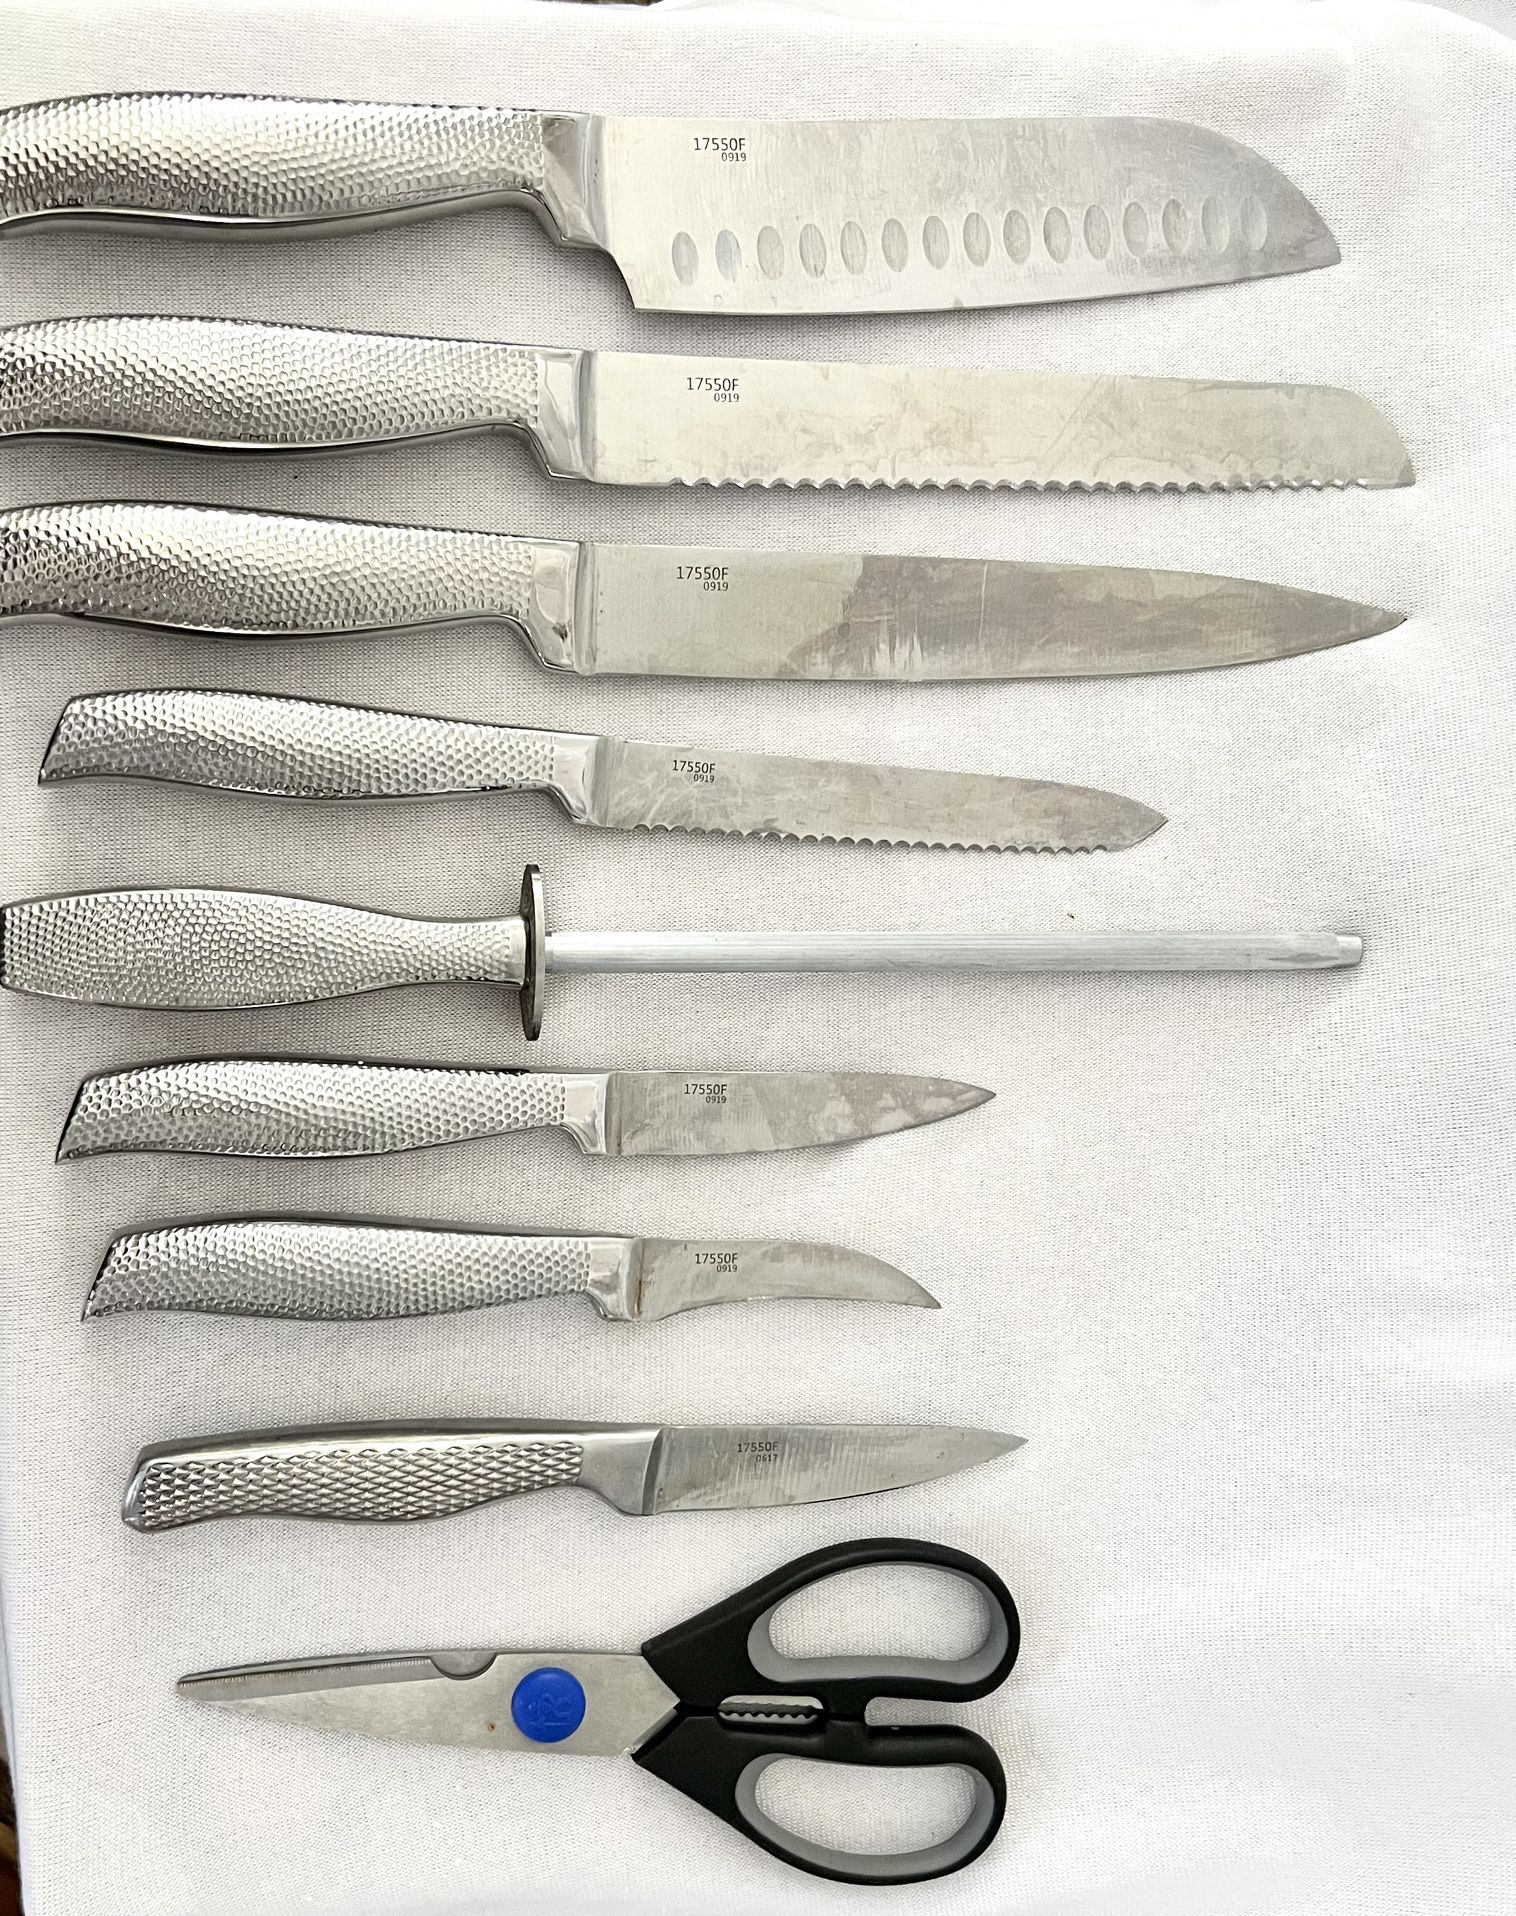 Cuisinart Advantage 12 Pc Knive Set With Blade Guards for Sale in Whittier,  CA - OfferUp